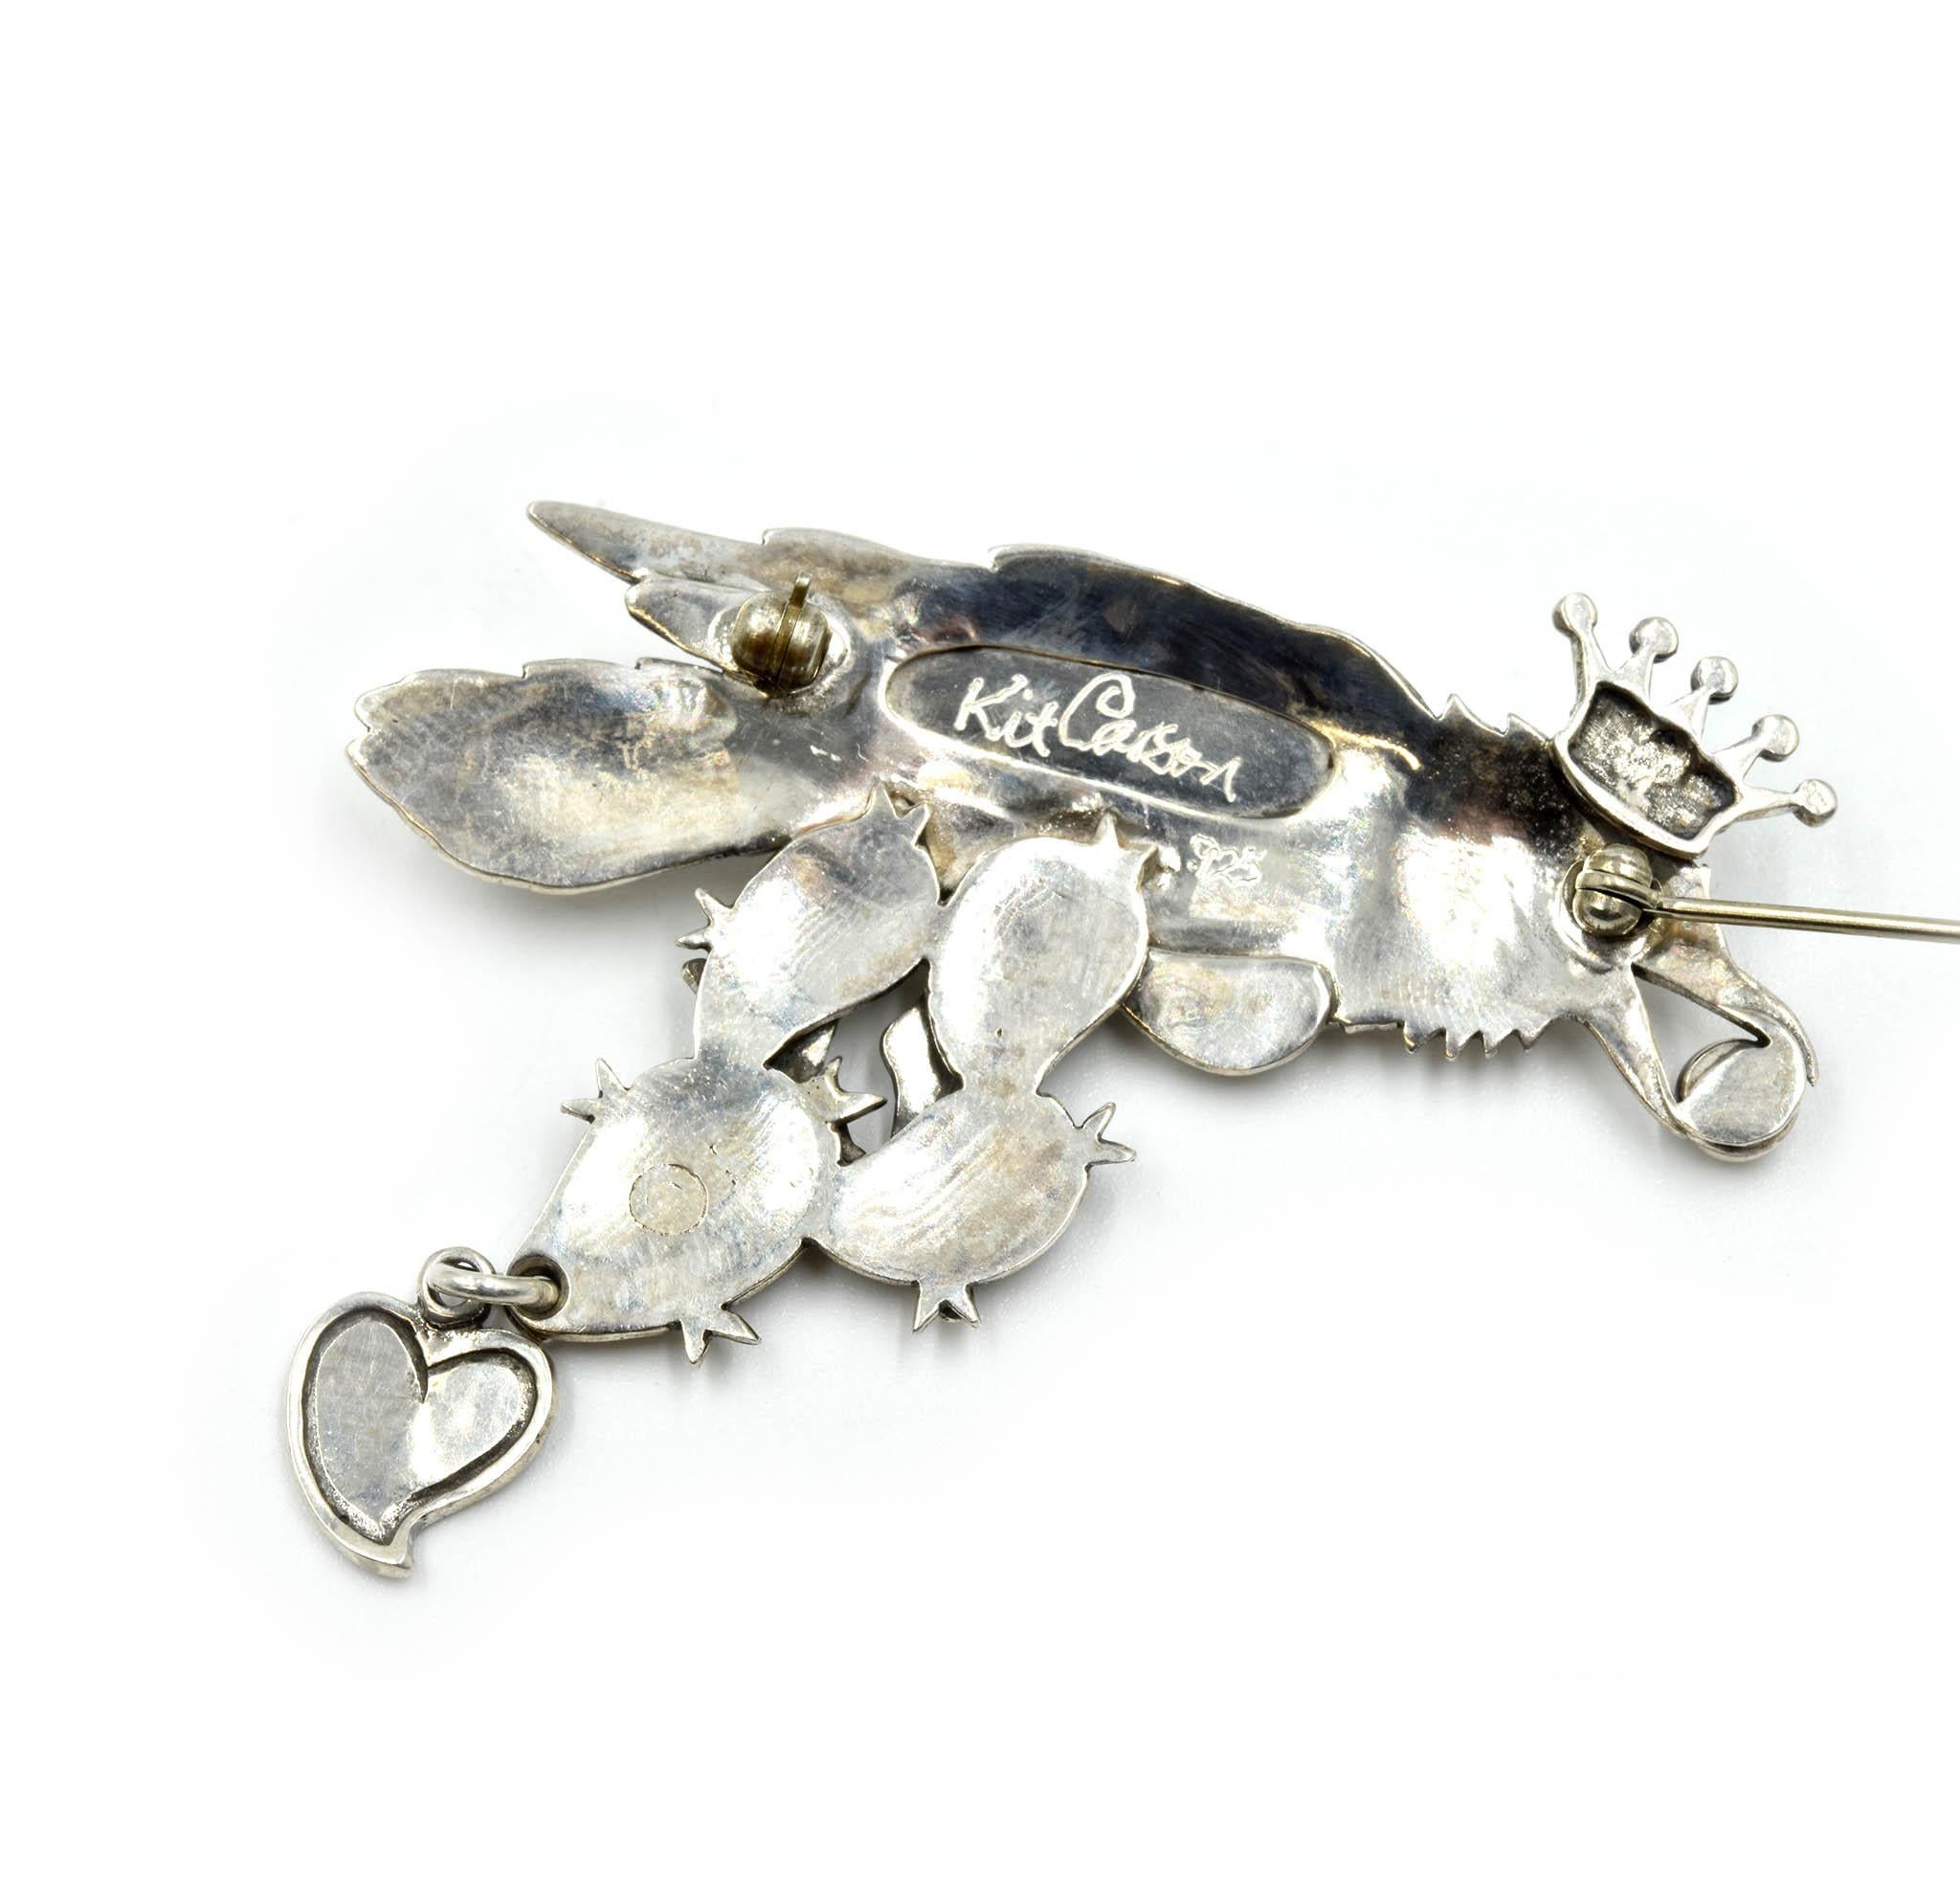 Designer: Kit Carson
Material: sterling silver
Dimensions: Kit Carson pin measures 2 1/4-inches long and 2 inches-wide
Weight: 12.70 grams
Retail: $385
